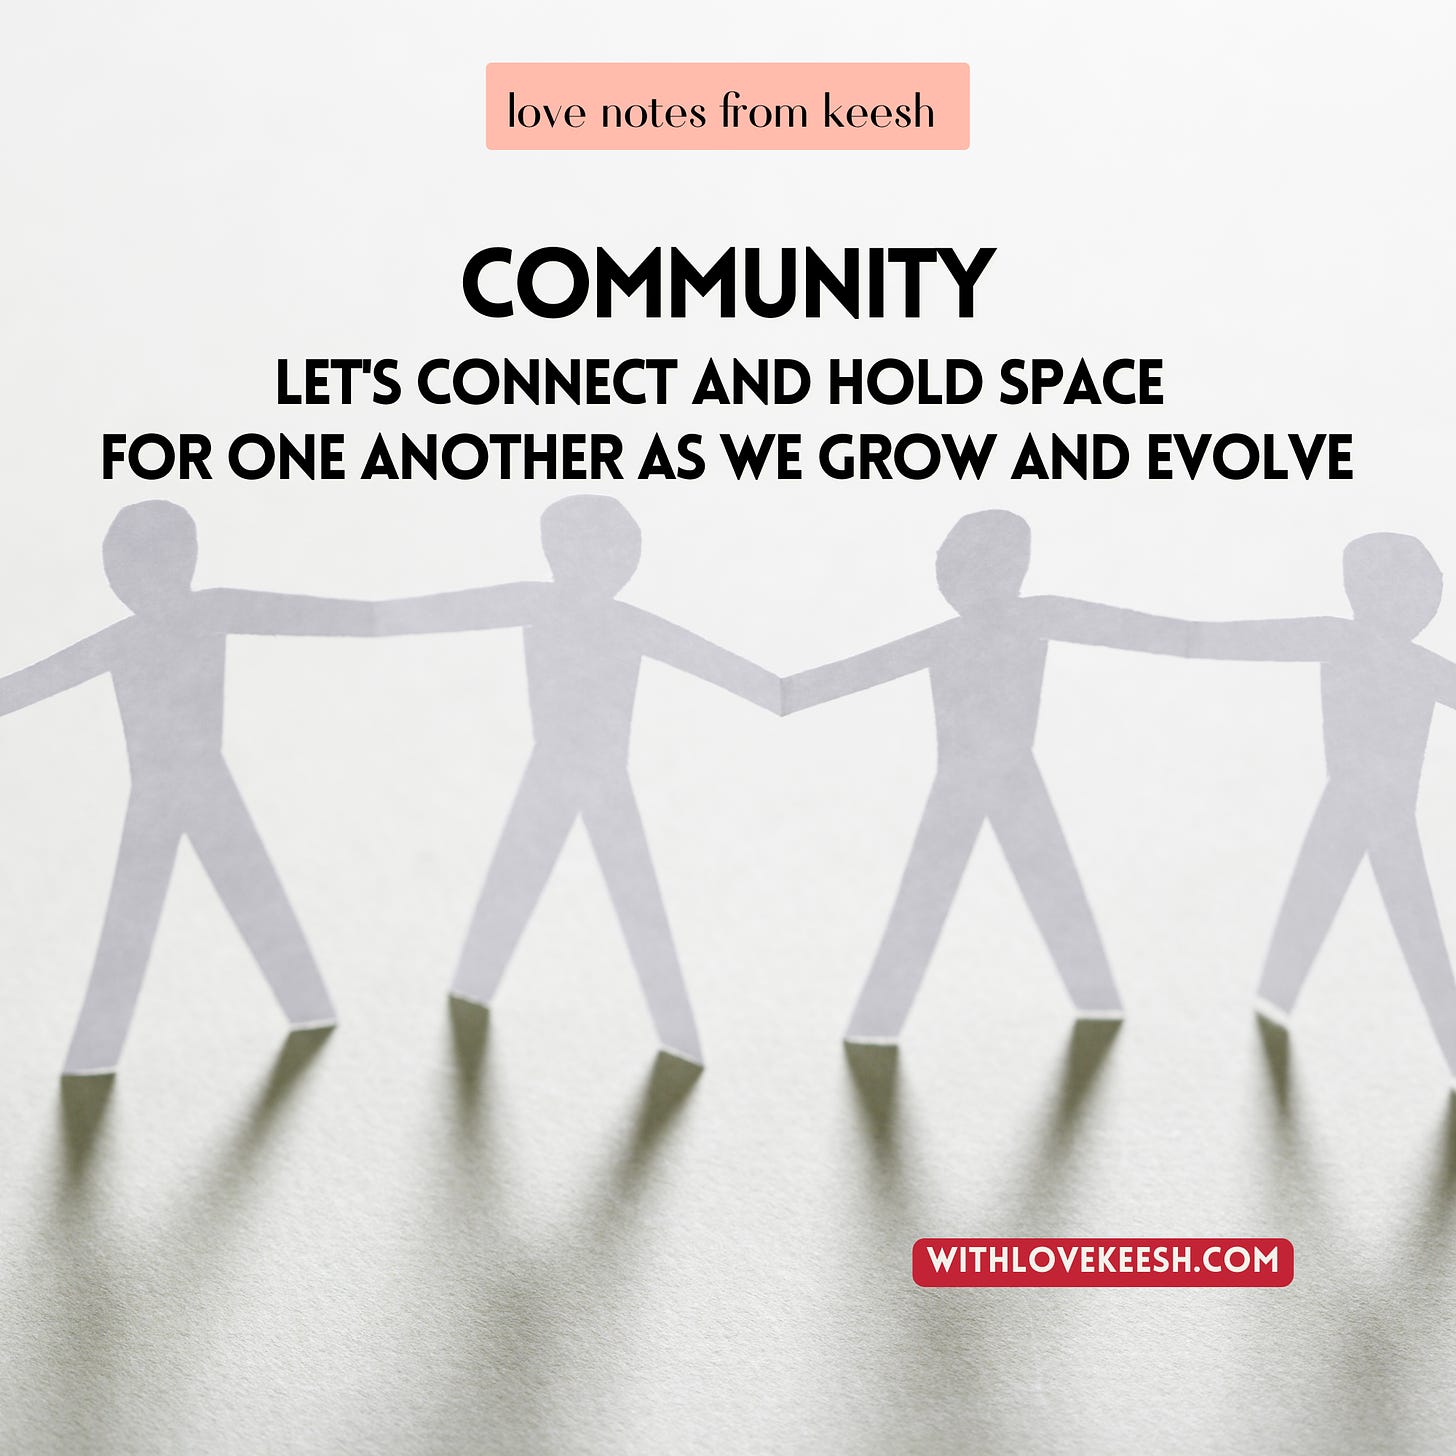 Community: let's connect and hold space for one another as we grow and evolve